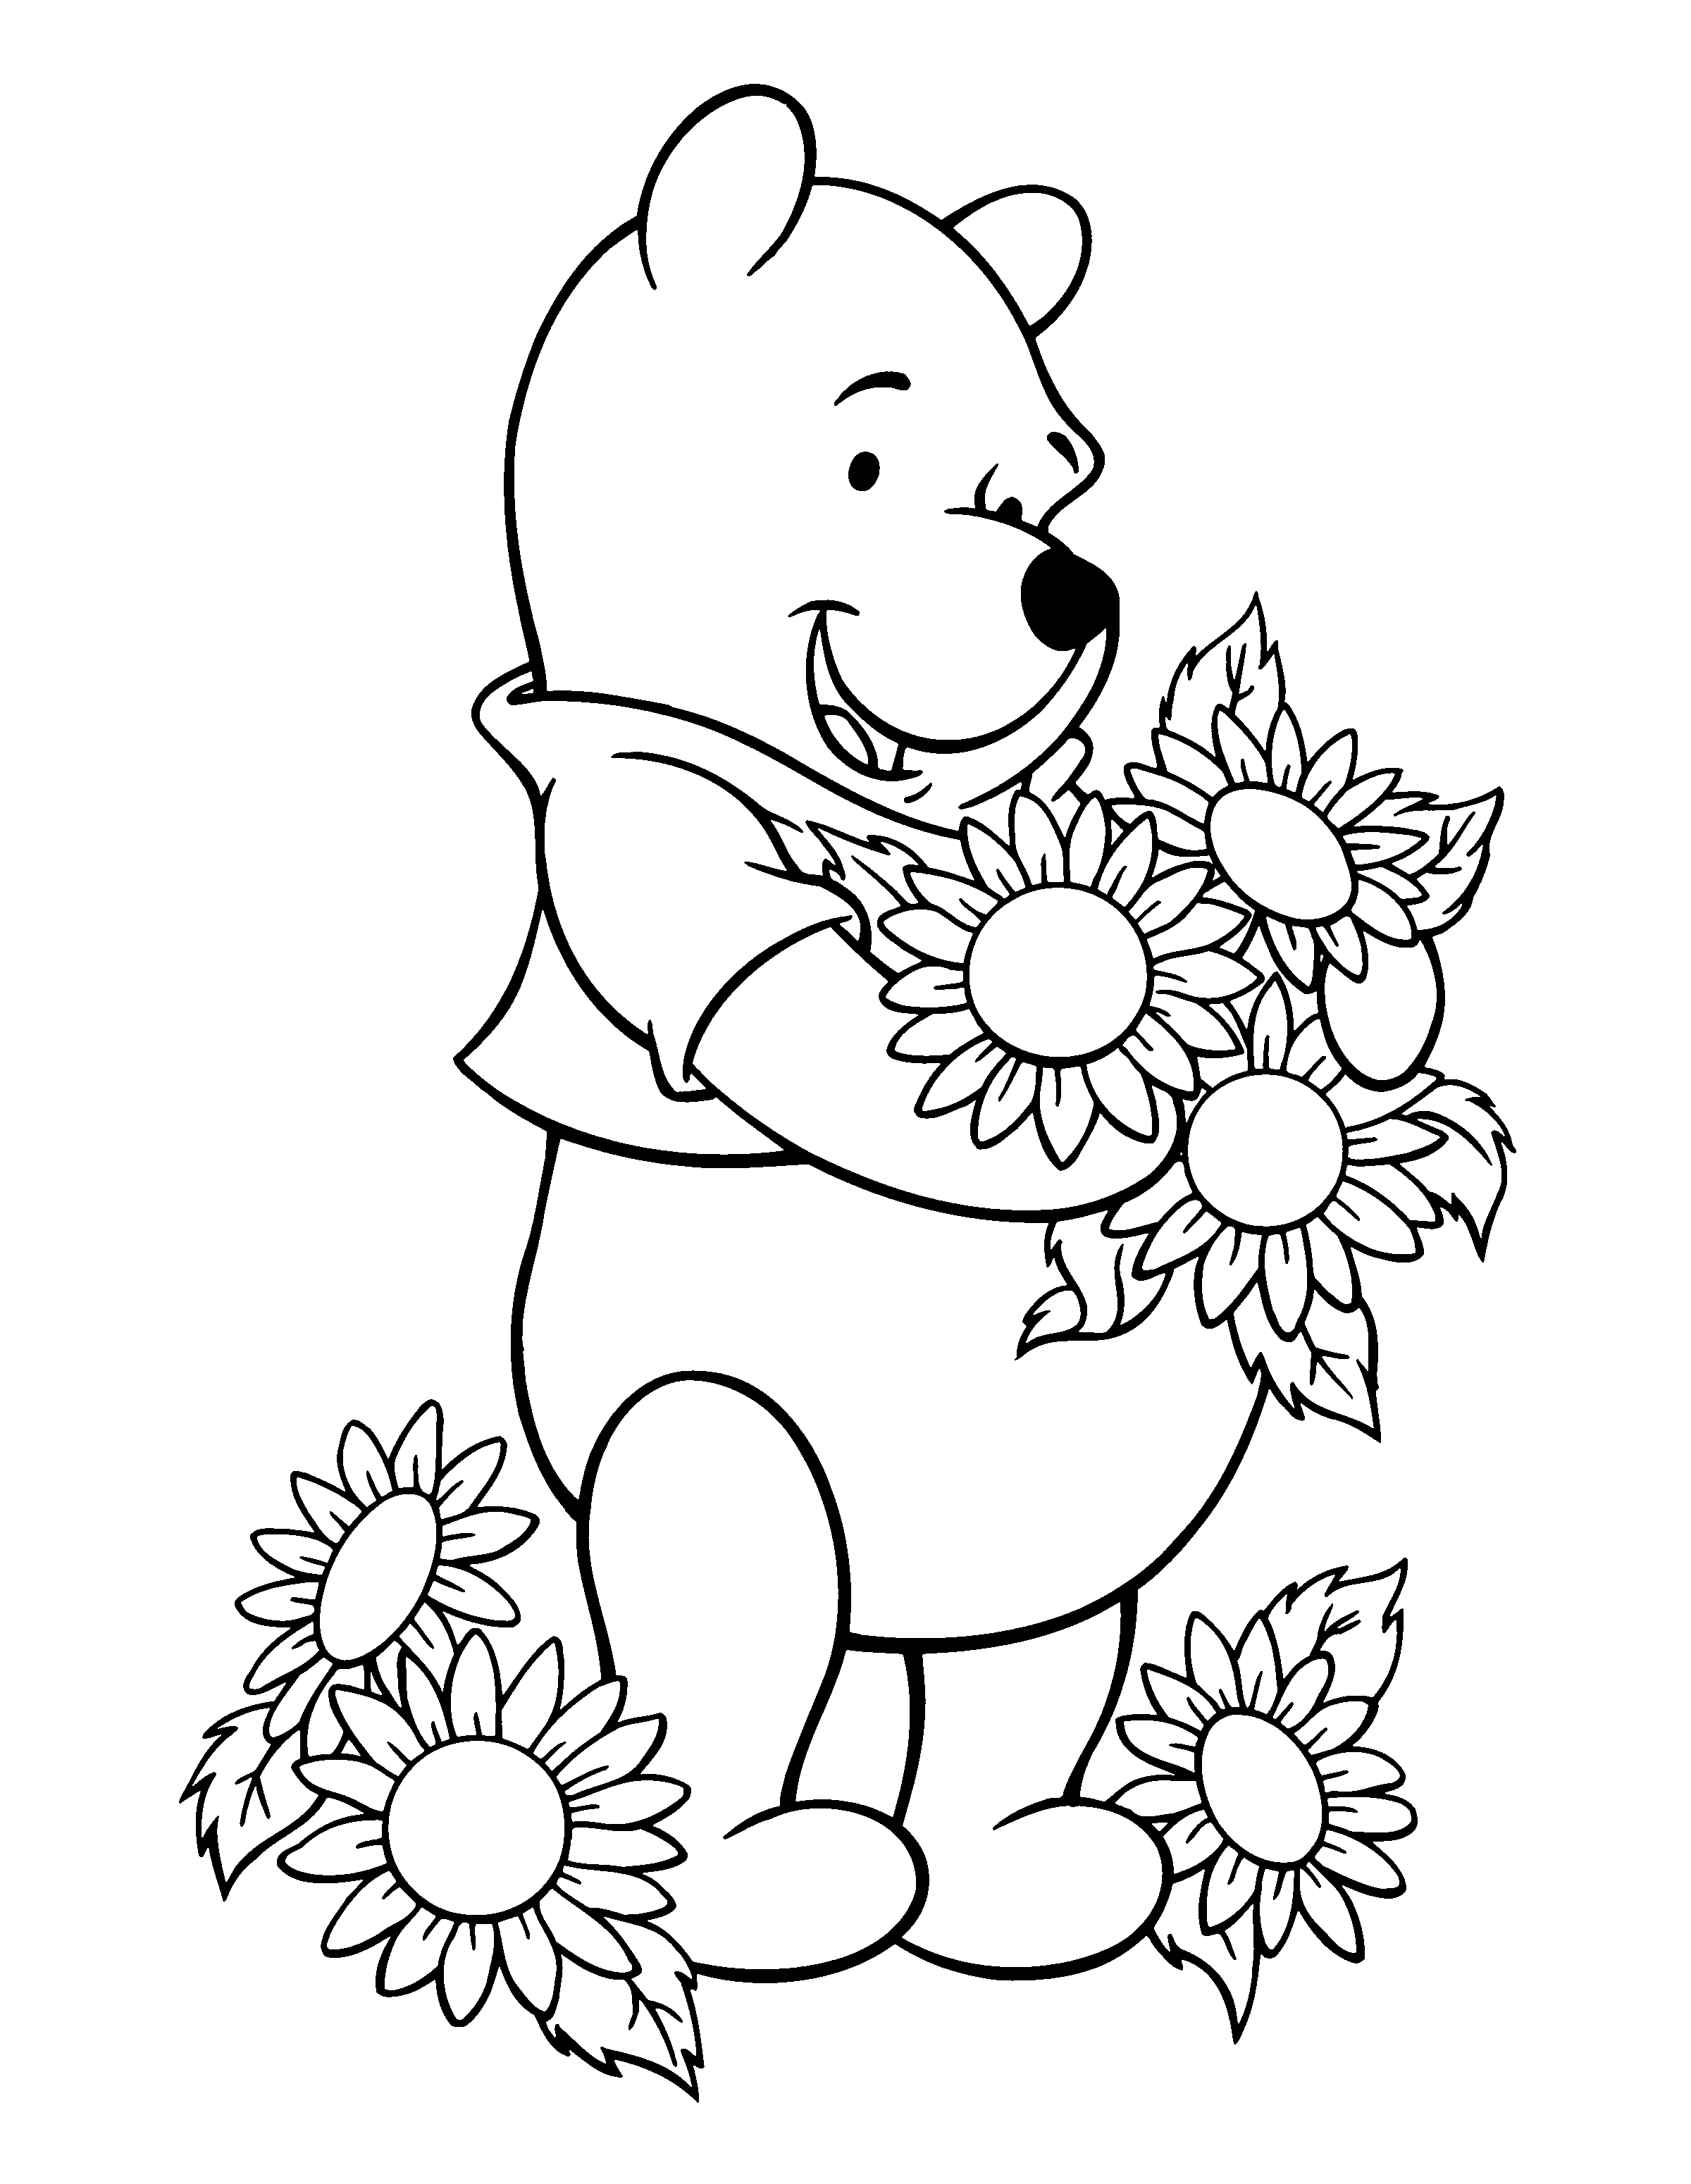 free winnie the pooh coloring pages transmissionpress winnie the pooh coloring pages free free winnie pooh coloring the pages 